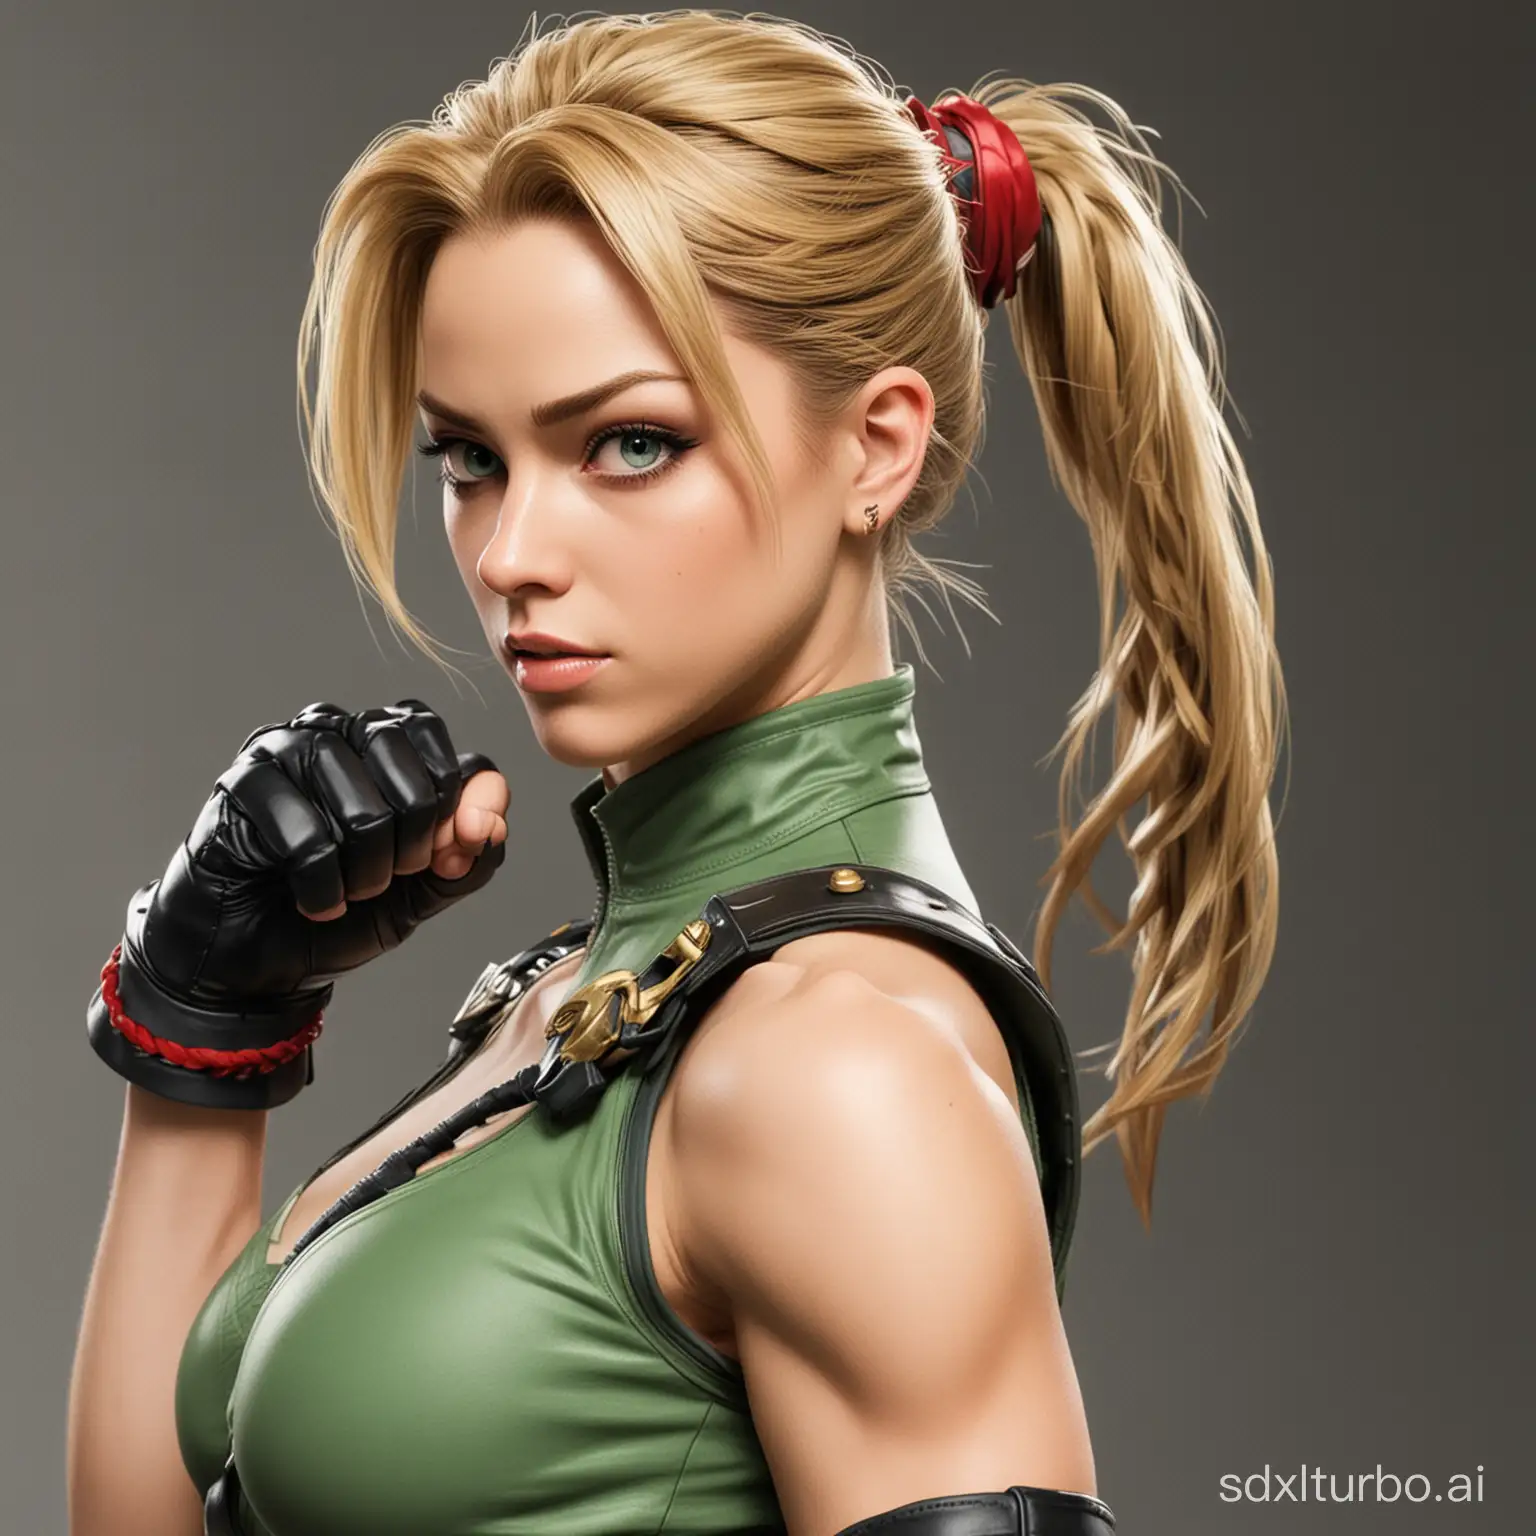 Fierce-Fighter-Cammy-from-Street-Fighter-Video-Game-Series